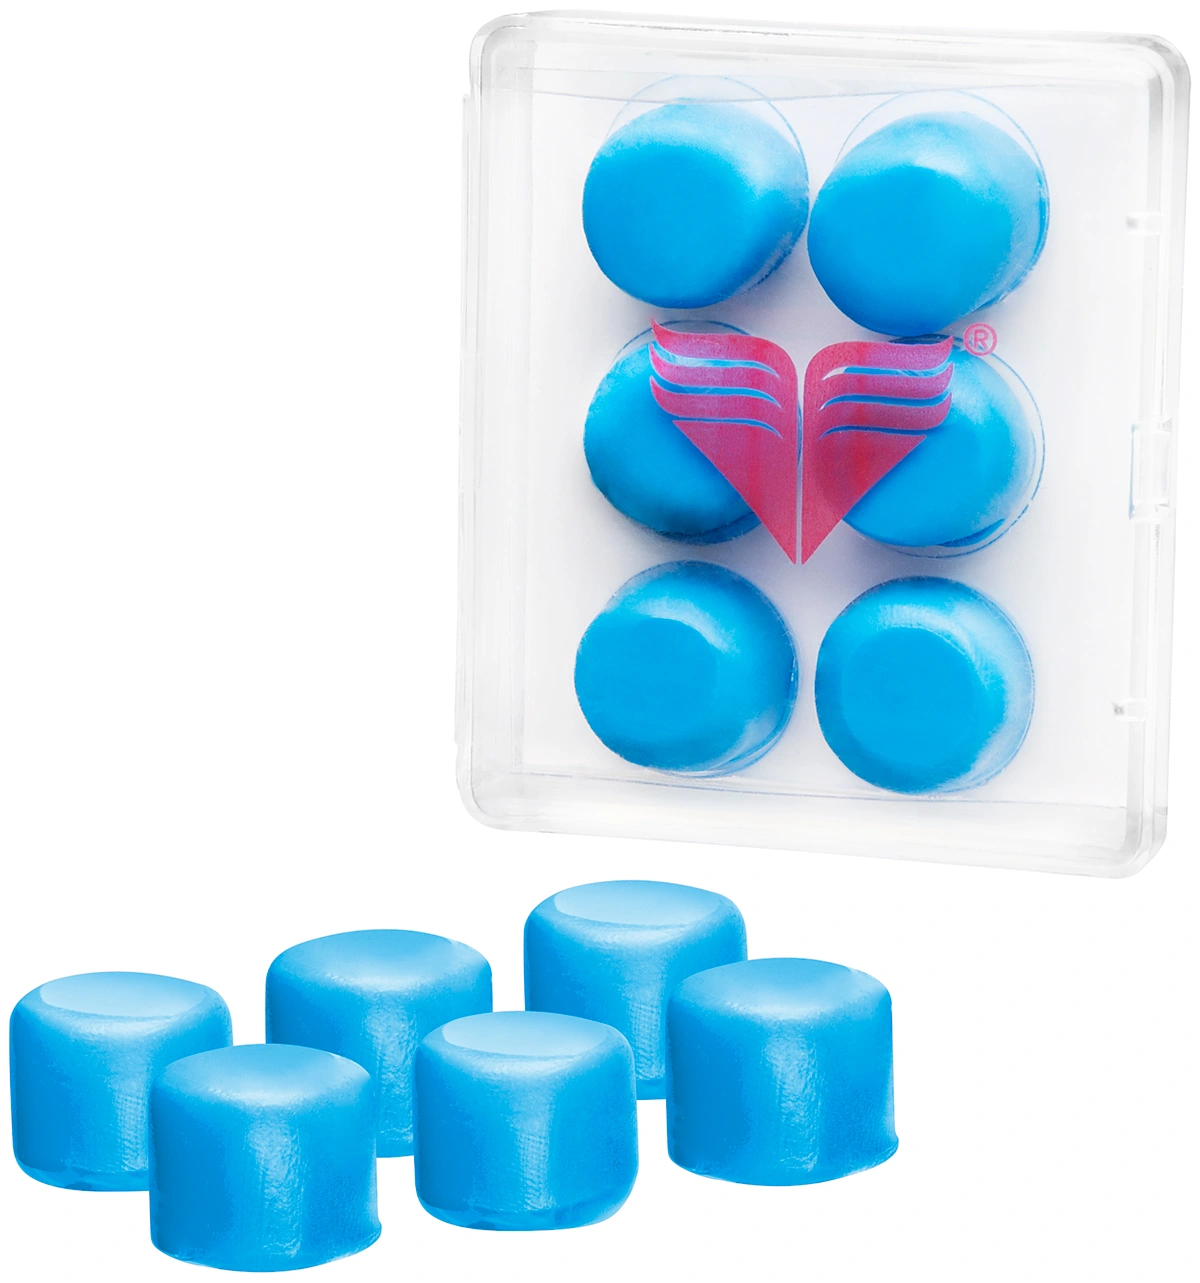 Kids soft silicone ear plugs in blue colour